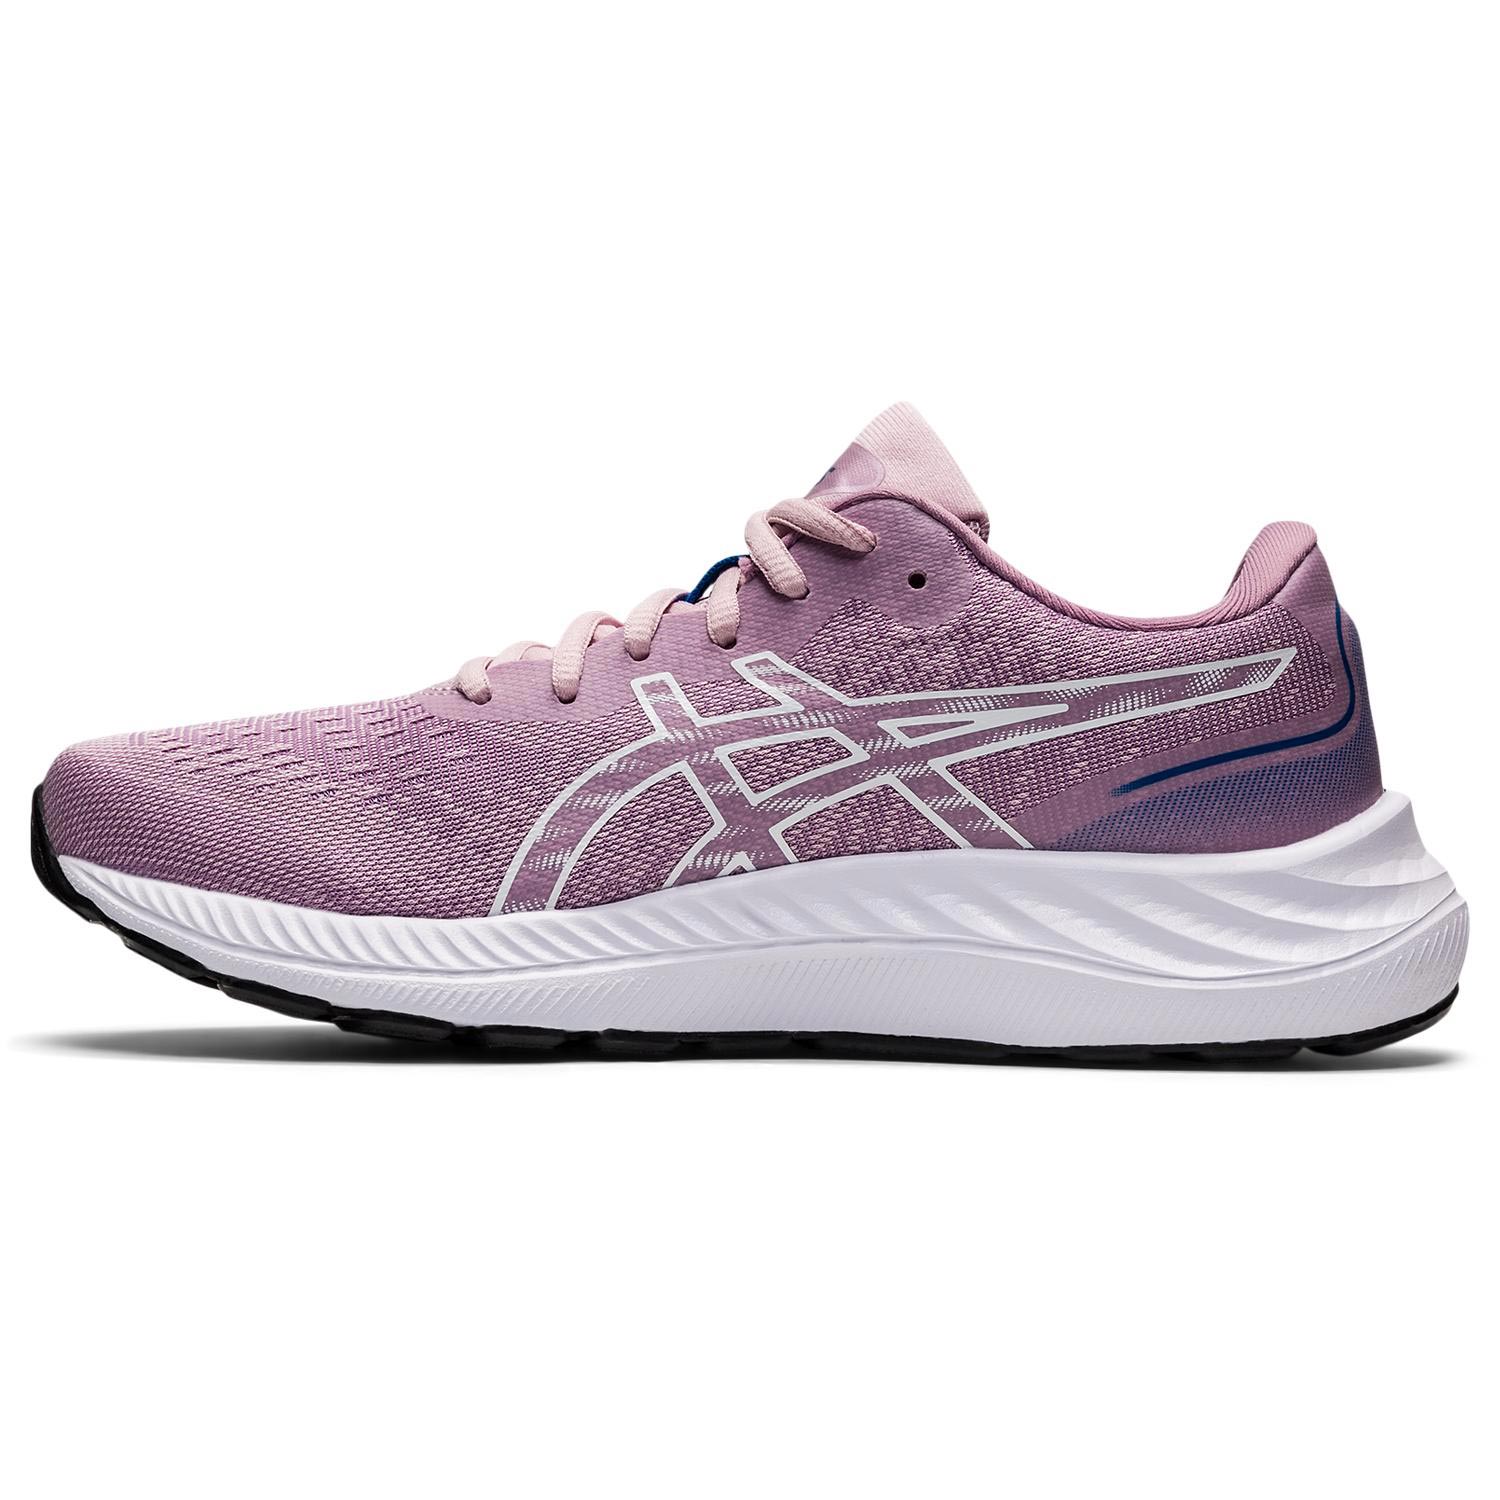 ASICS GEL-EXCITE 9 WOMENS RUNNING SHOES